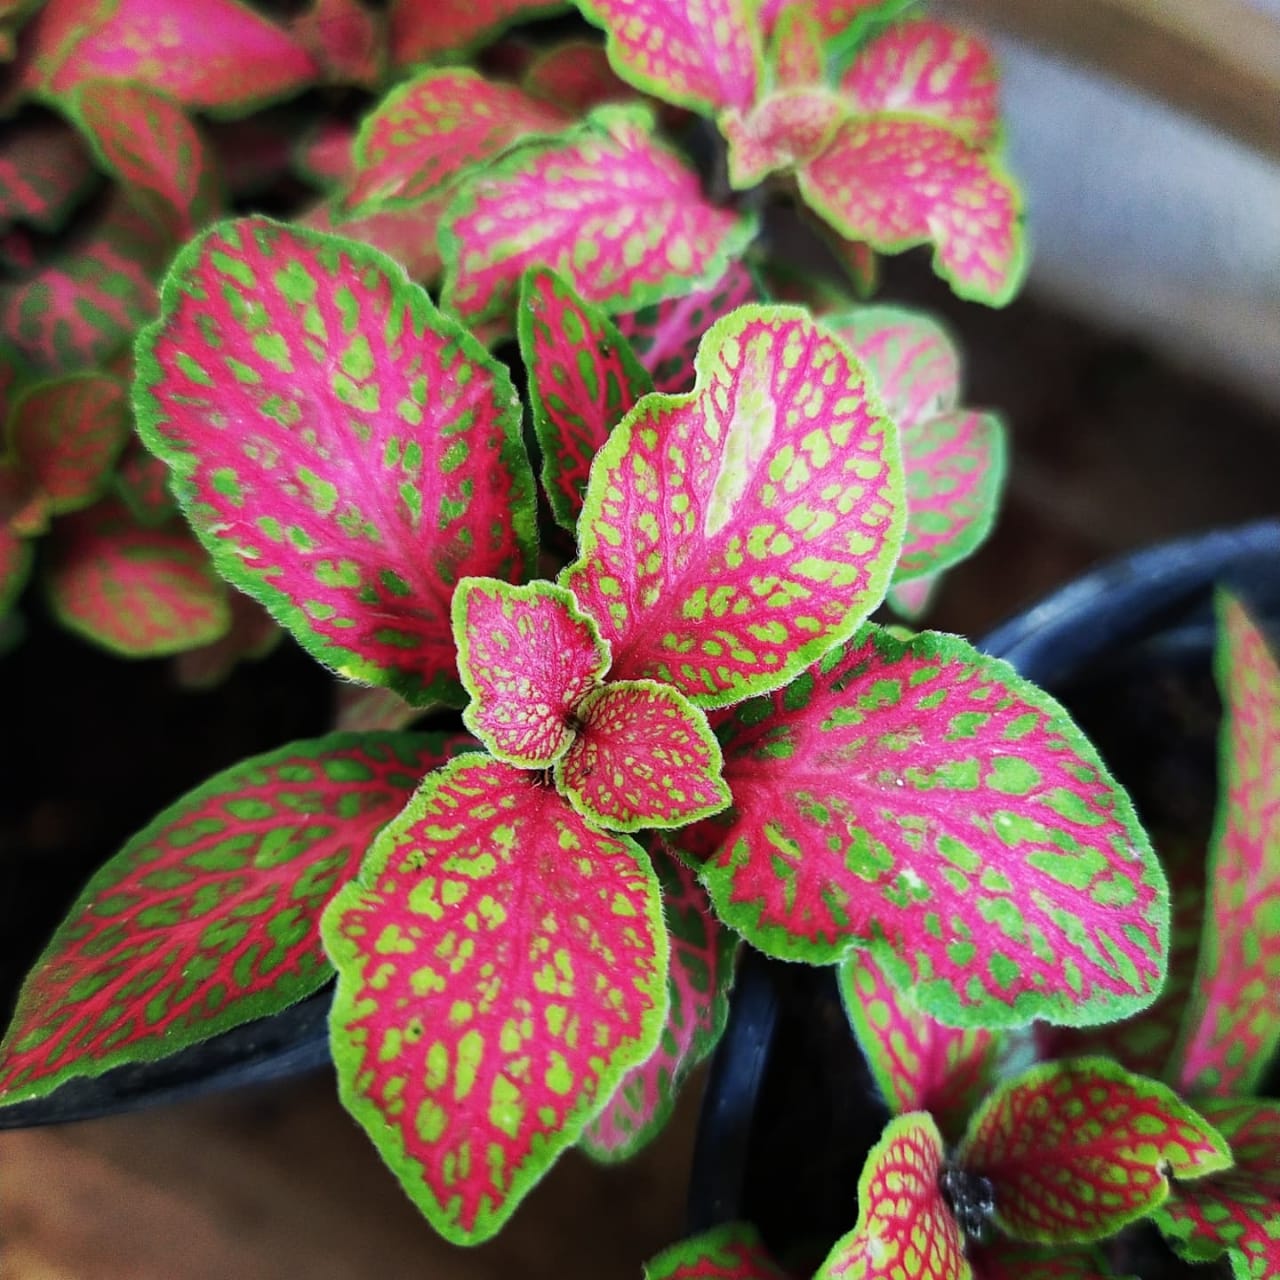 Fittonia / Nerve plant – Foolproof care tips